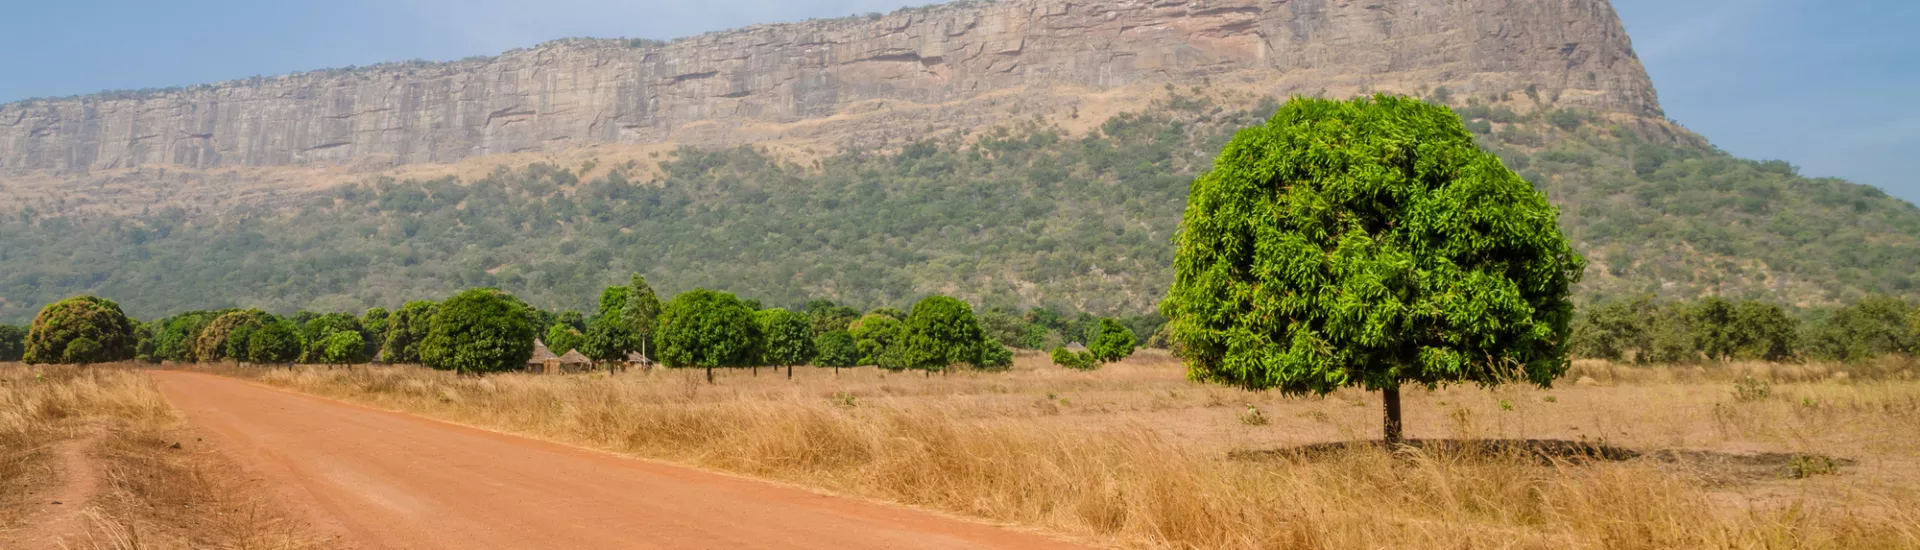 Red dirt and gravel road, single trees and large flat topped mountain